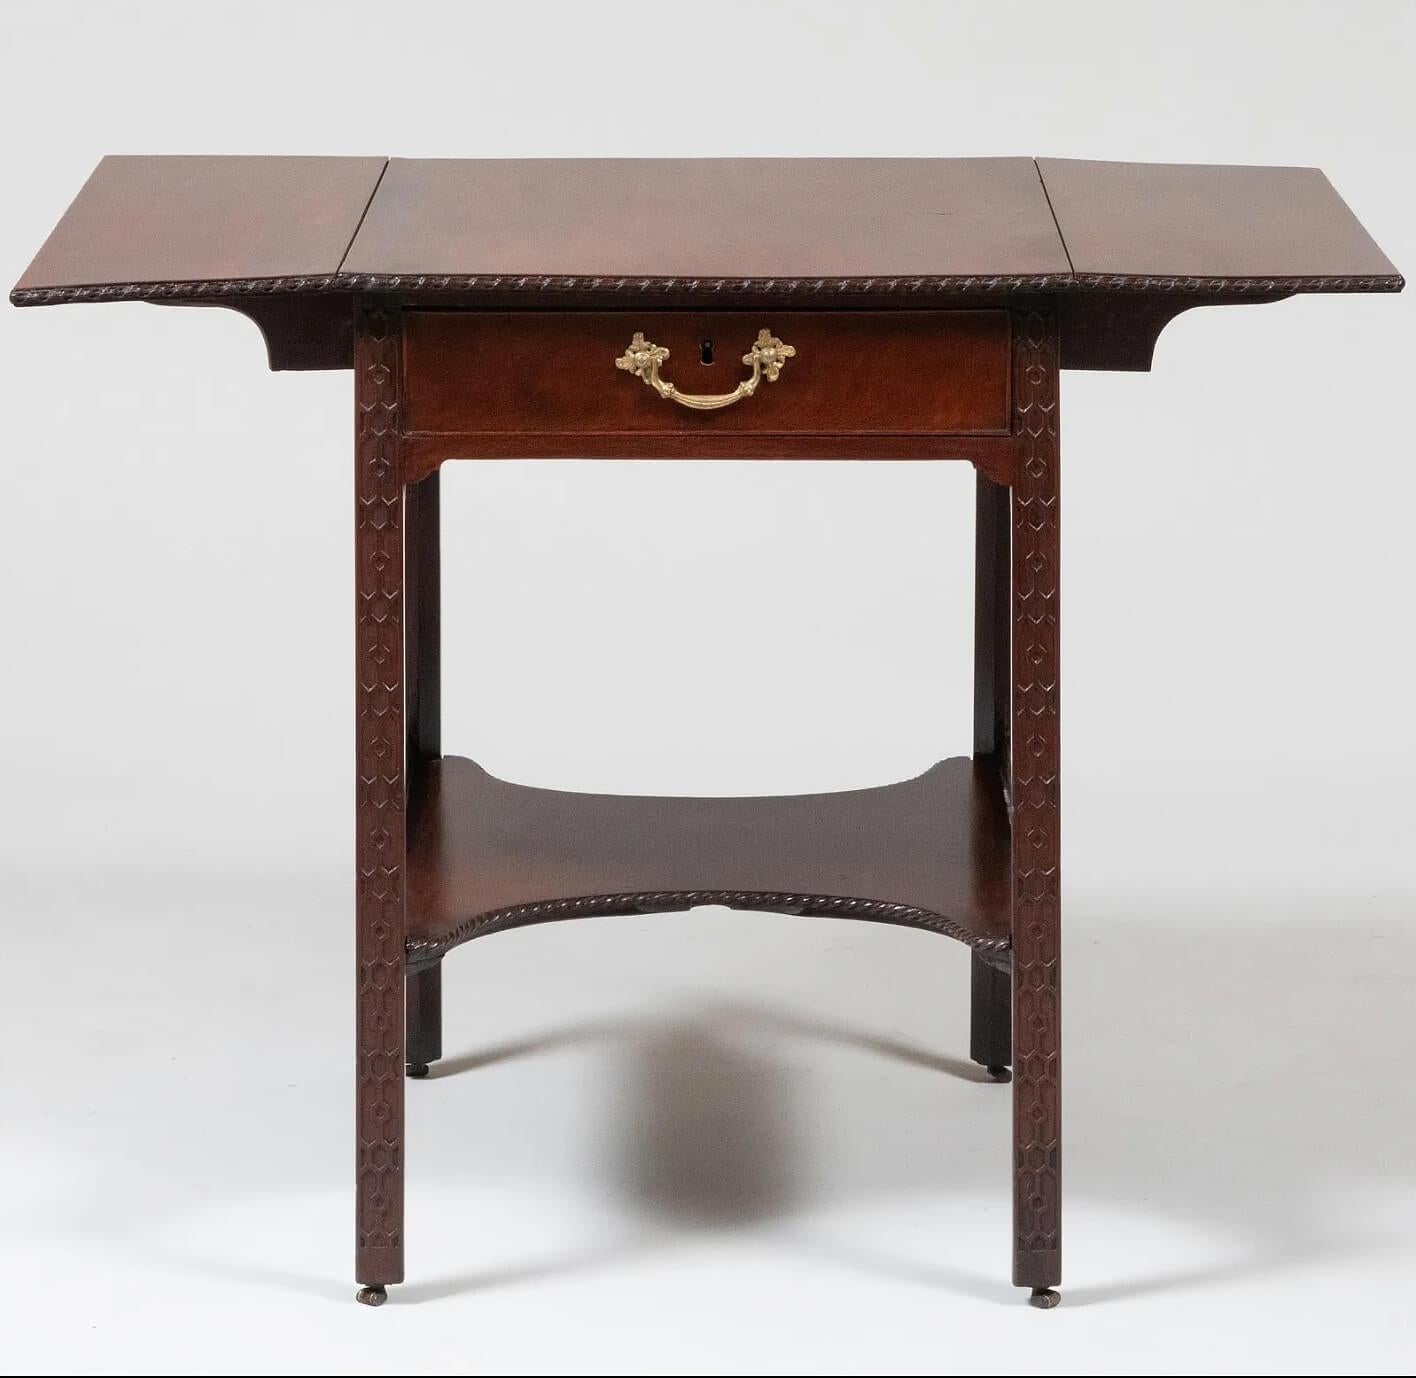 Hand-Crafted English Georgian Chippendale Mahogany Double-Sided Pembroke Table, circa 1760 For Sale